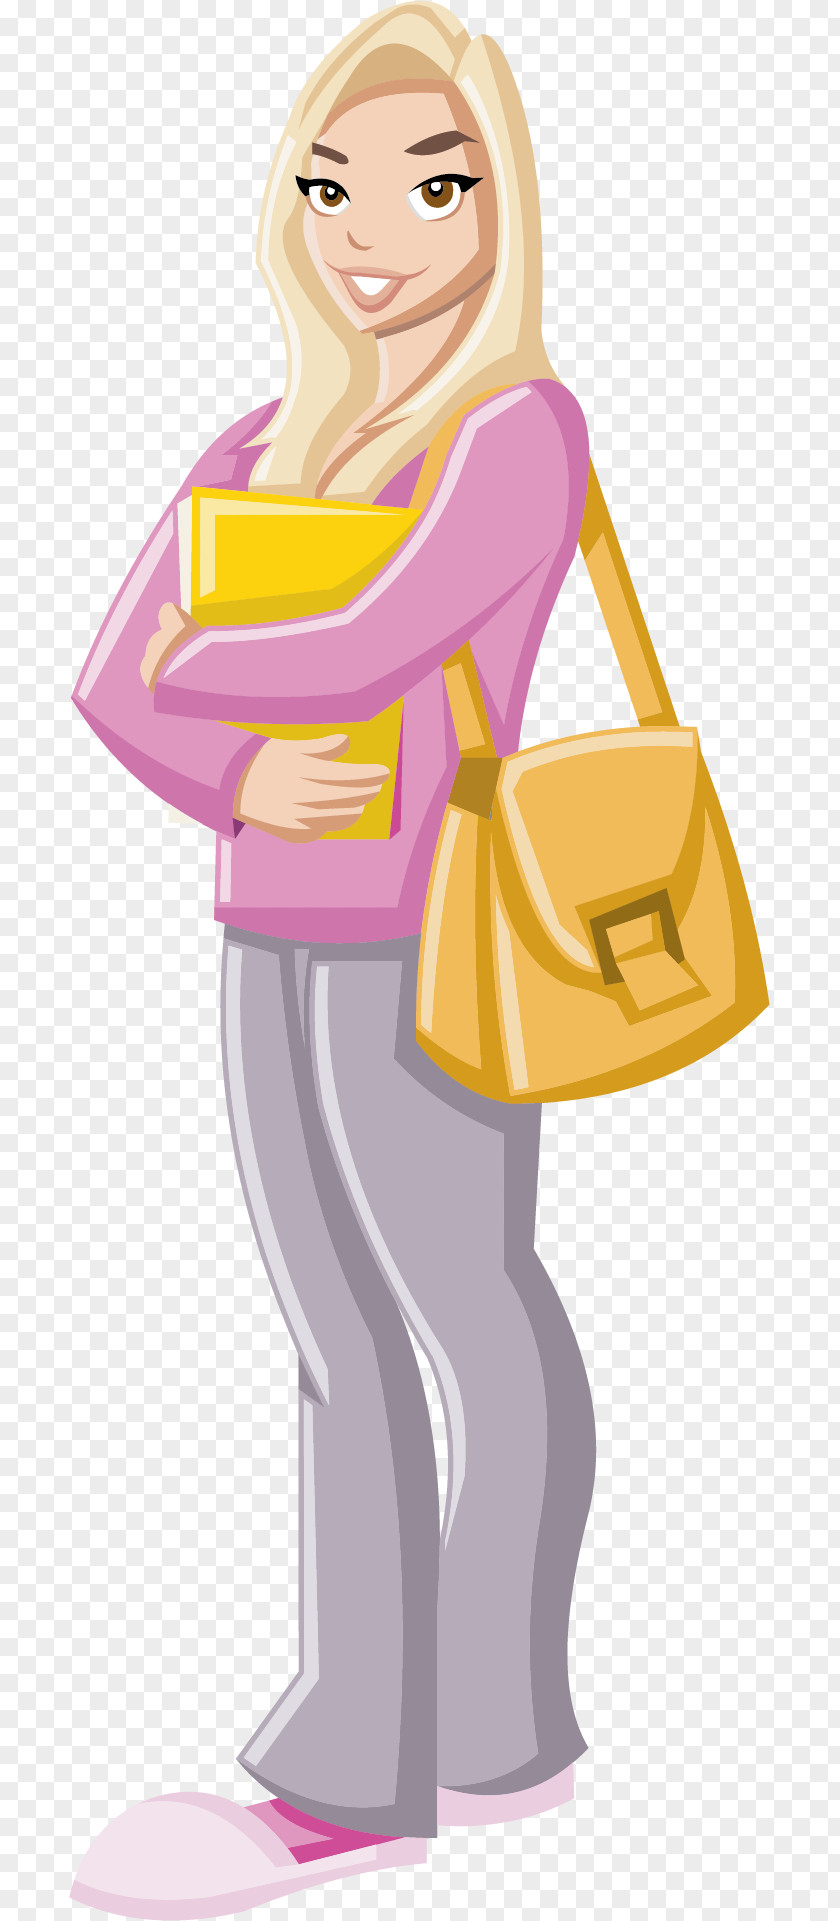 Learning Model Student Woman Illustration PNG